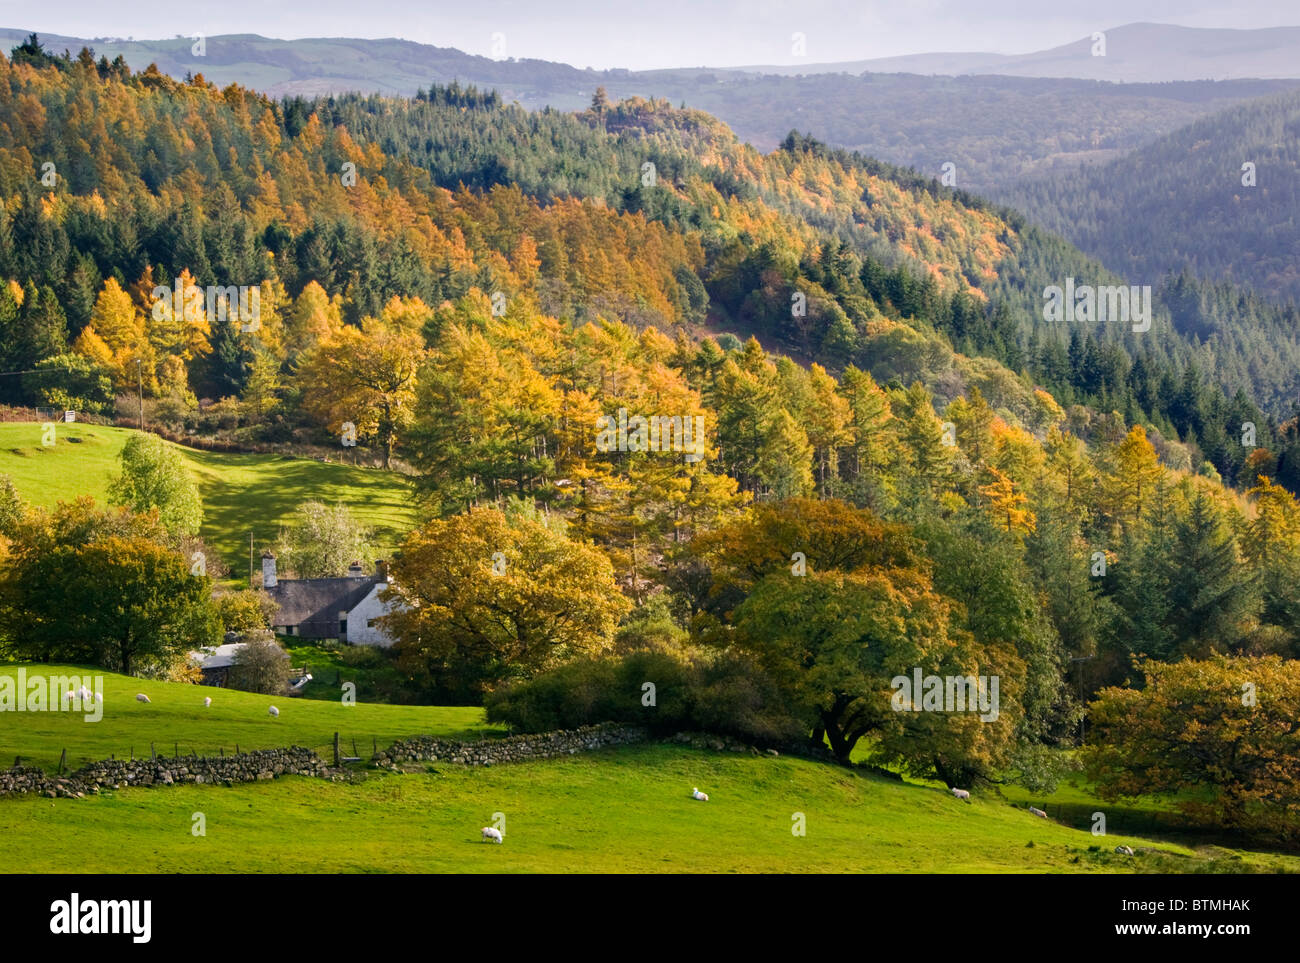 Autumn in the Gwydyr Forest, Near Betws-y-Coed, Snowdonia National Park, Wales, UK Stock Photo